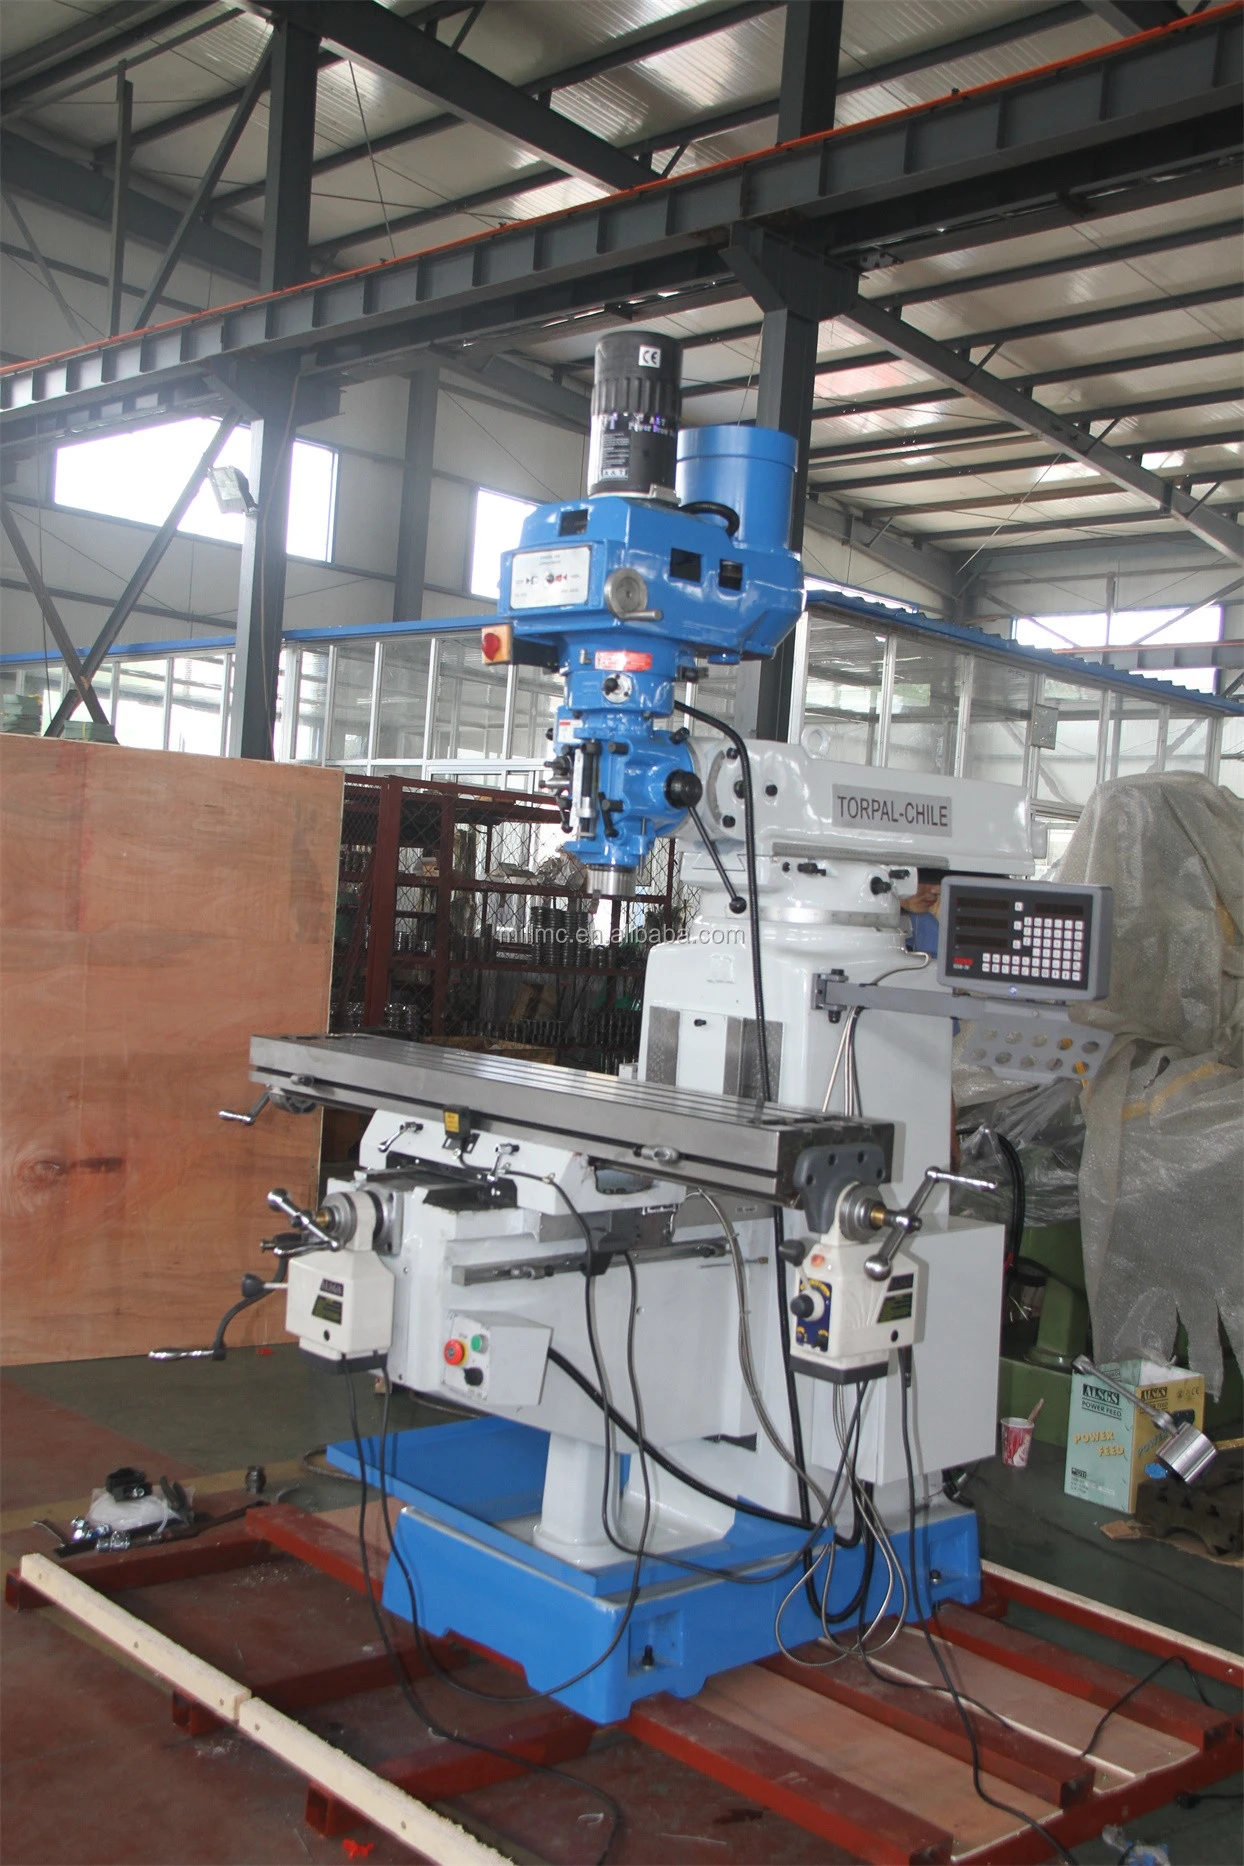 X6333 Taiwan 5HP High speed DRO auto feed Vertical Turret Milling Machine